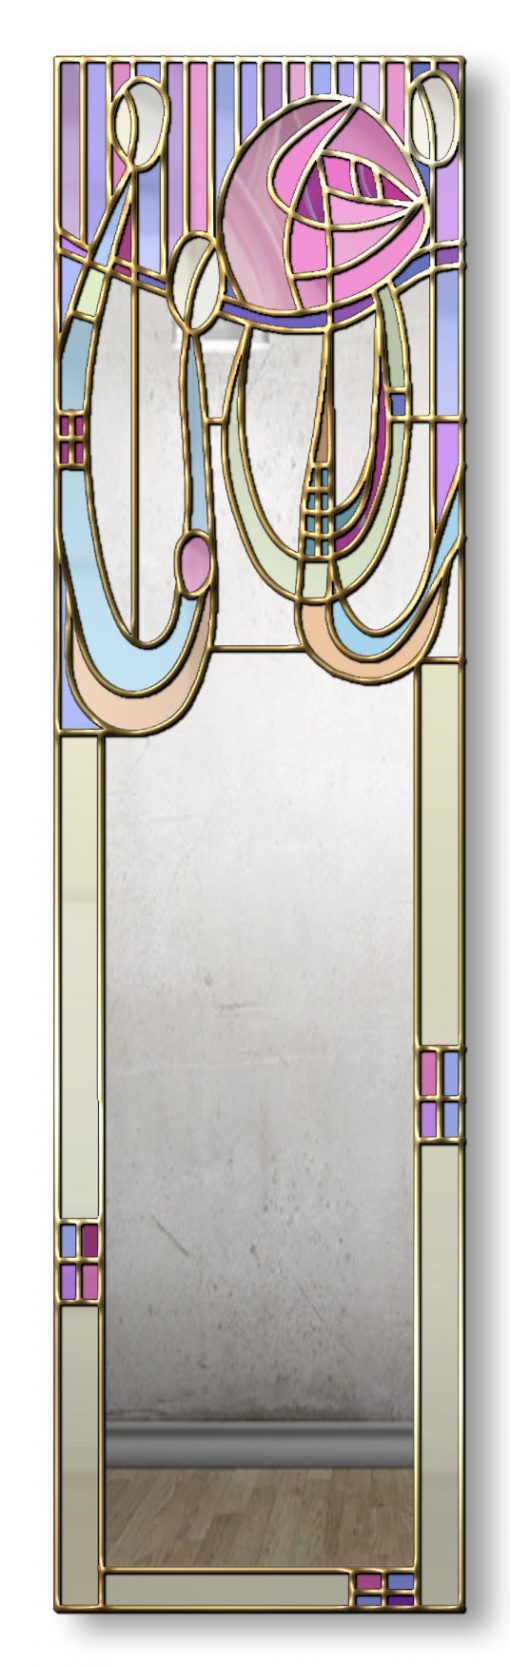 Anabel Handcrafted finished in Gold Trim Rene Mackintosh Mirror